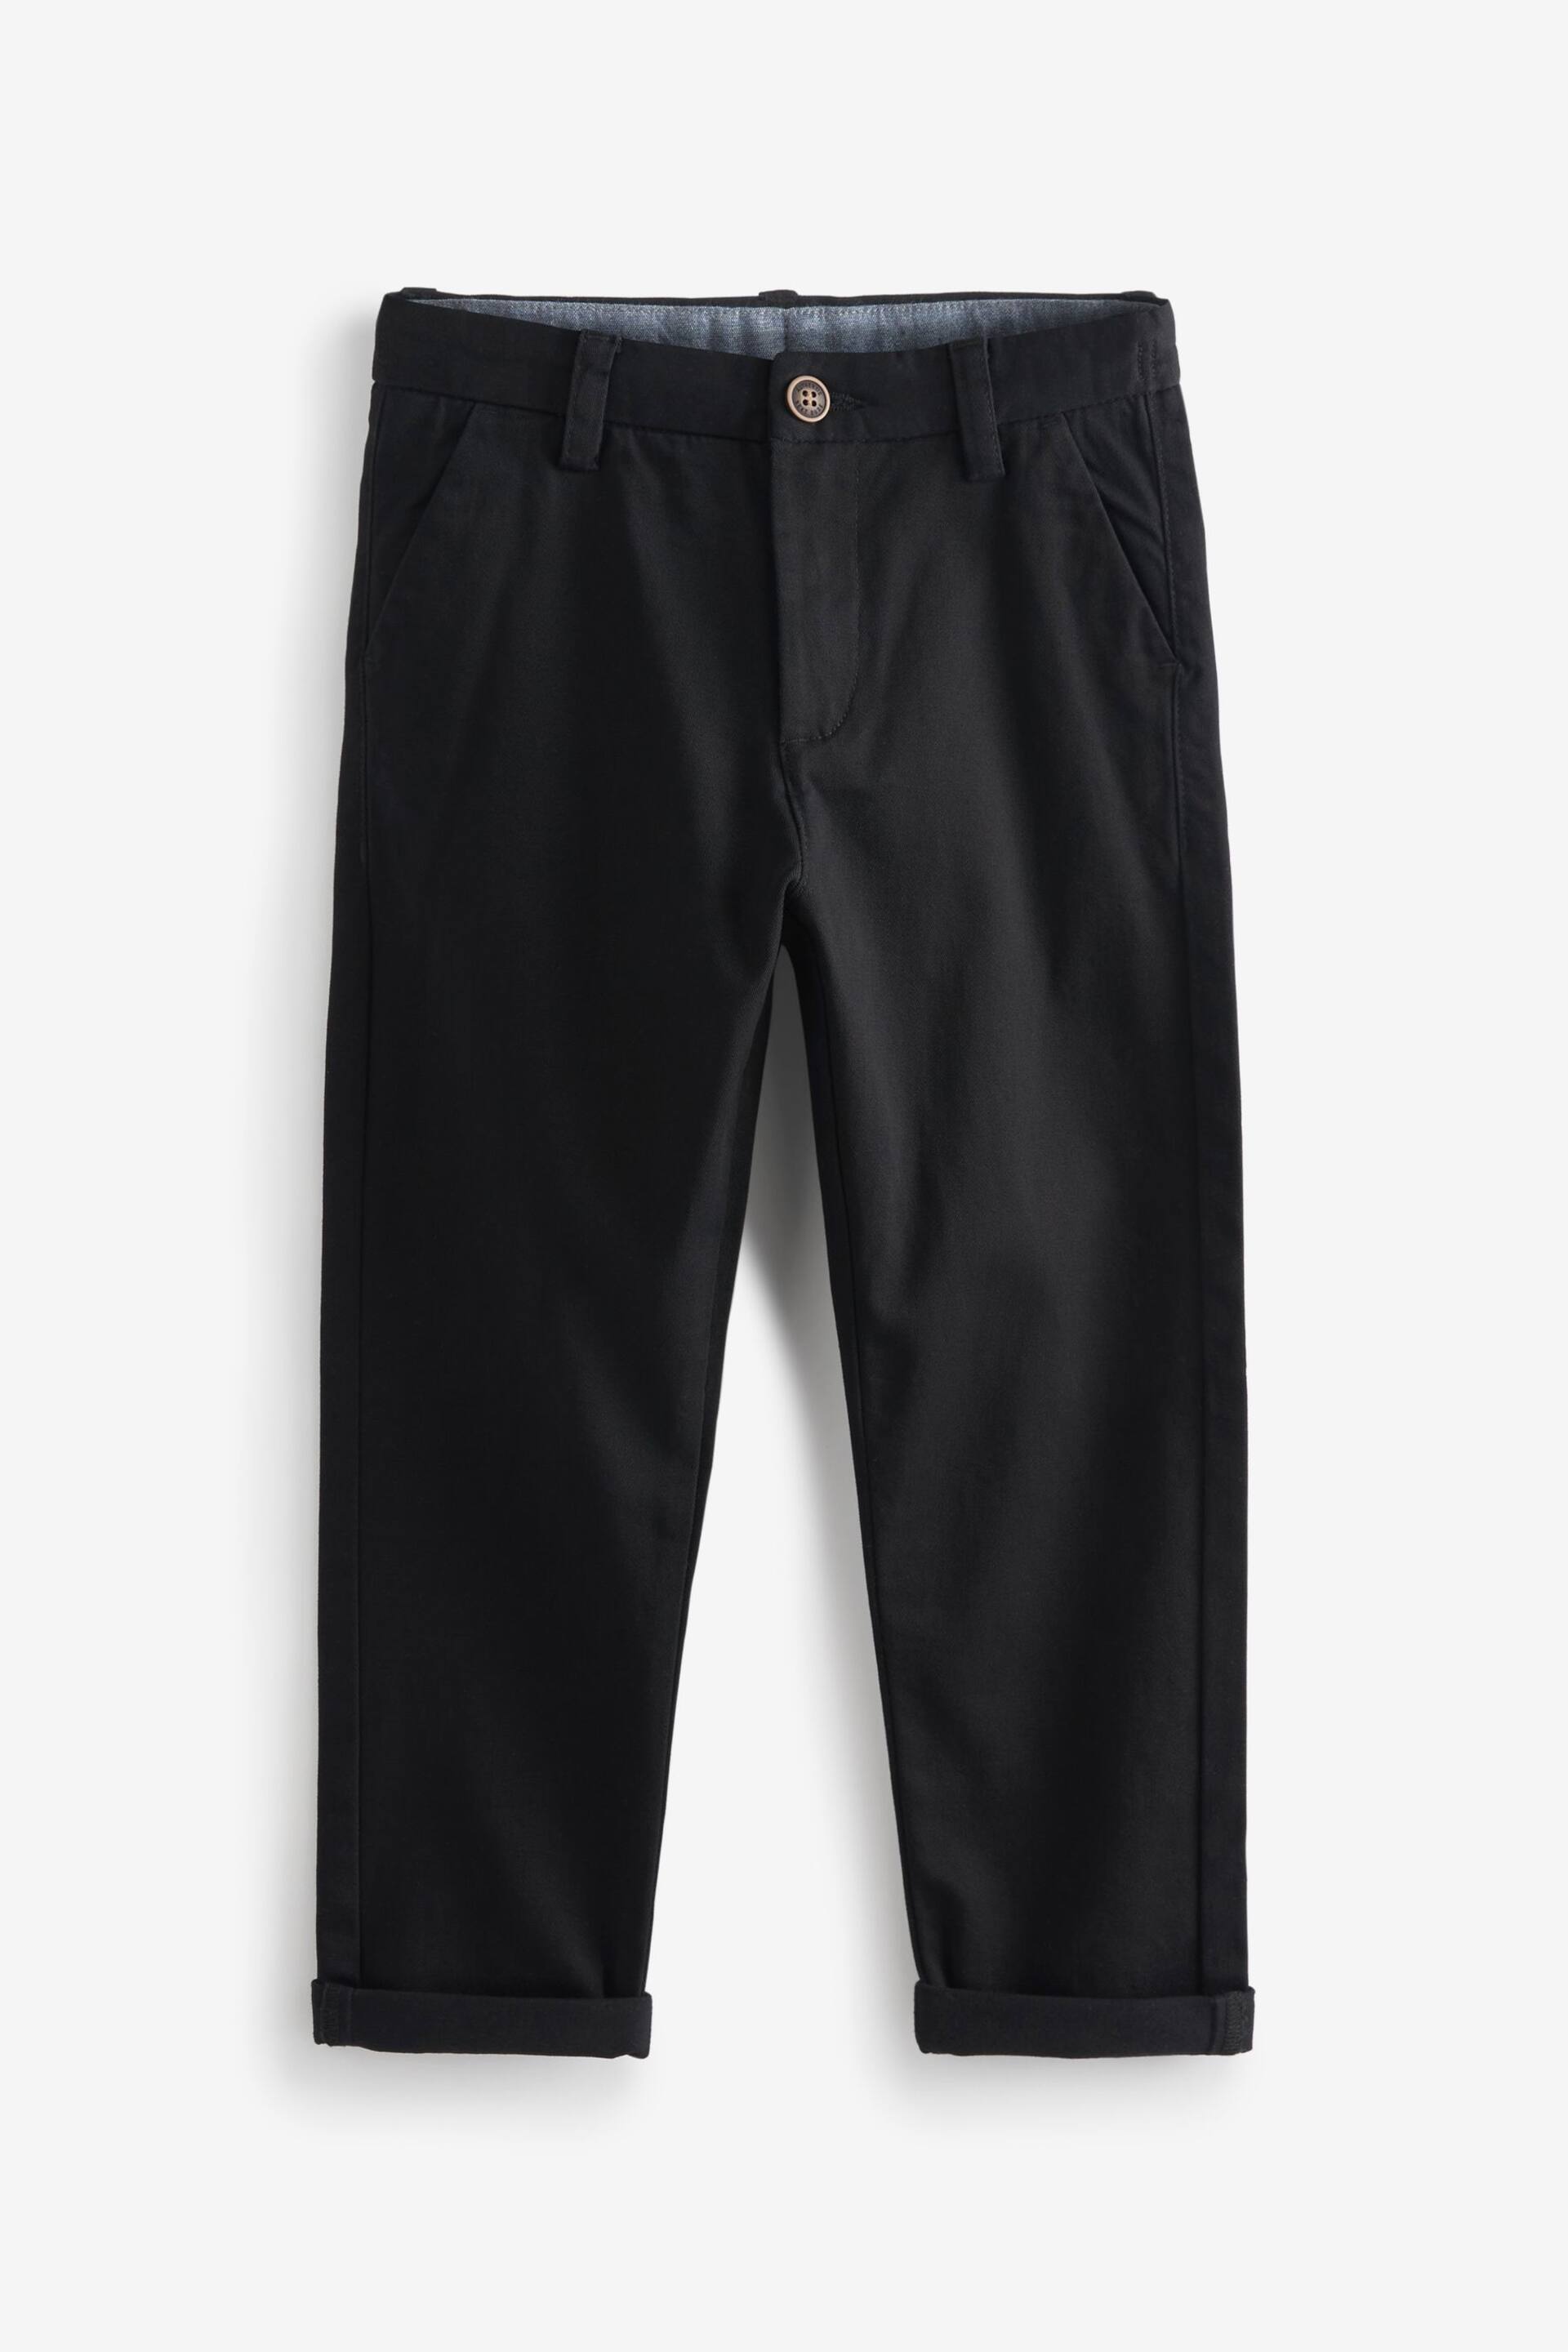 Black Tapered Loose Fit Stretch Chino Trousers (3-17yrs) - Image 1 of 2